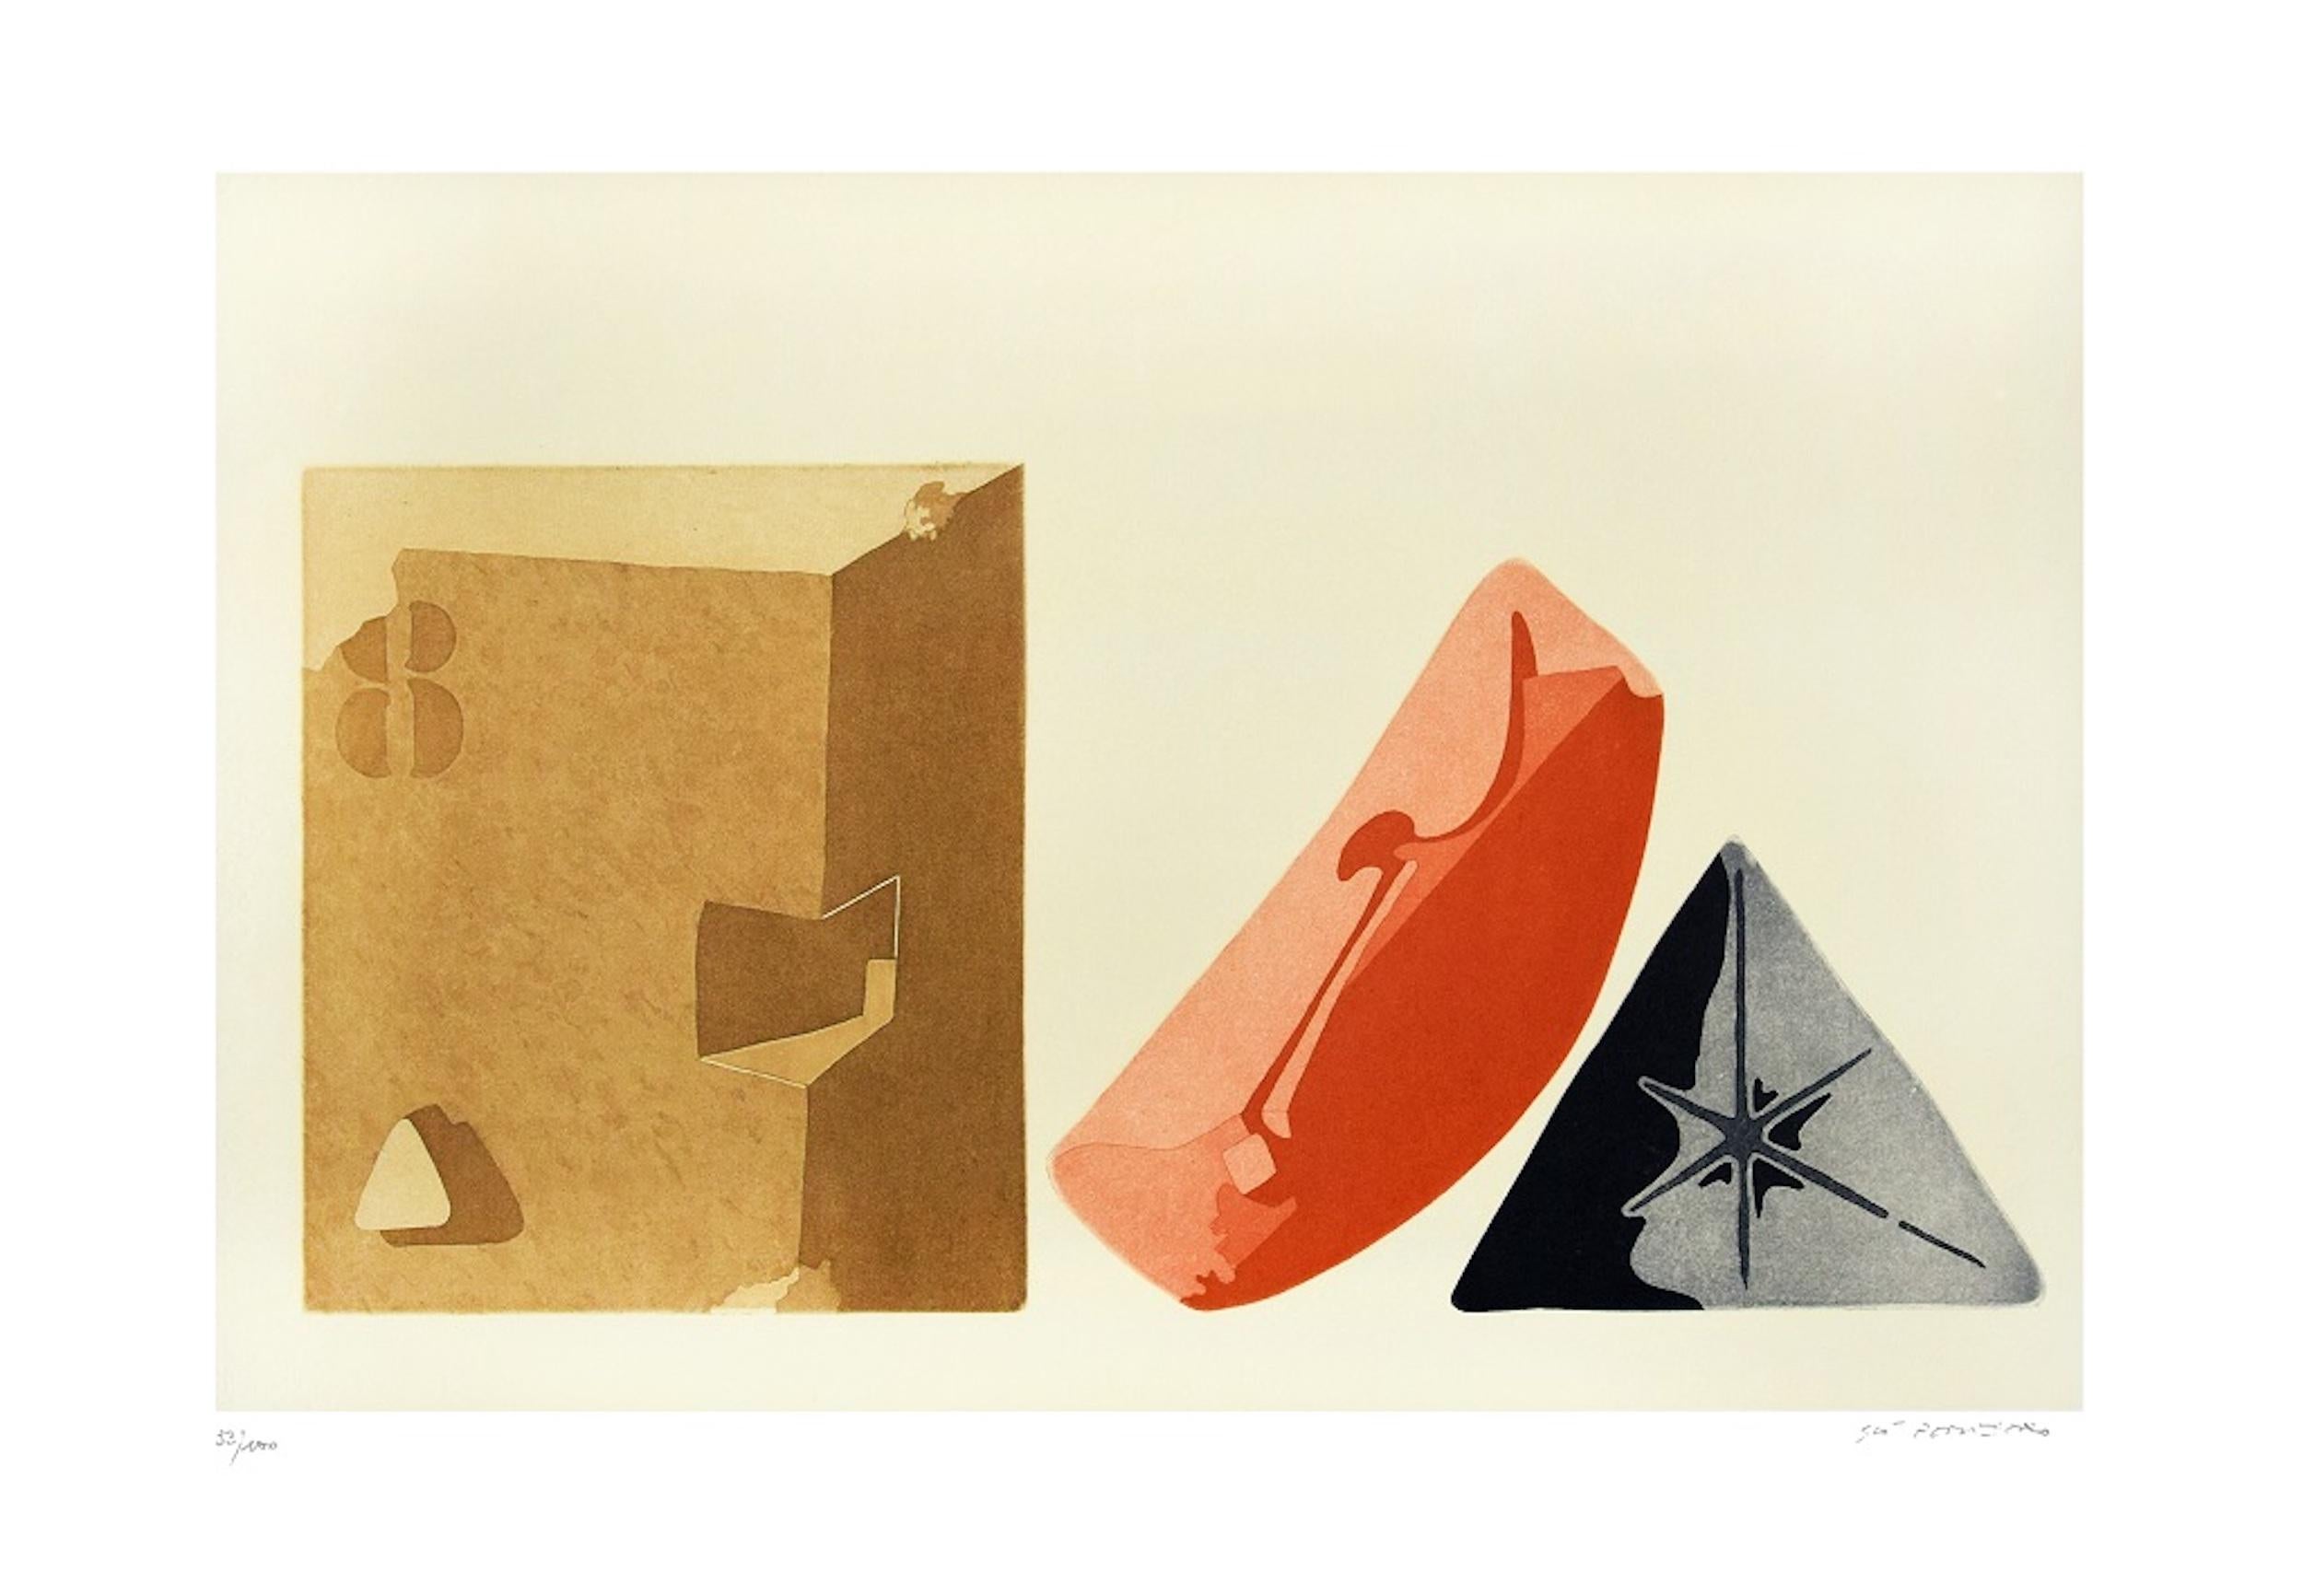 Gio Pomodoro Abstract Print - Constructions - Original Etching by Giò Pomodoro - 1970s